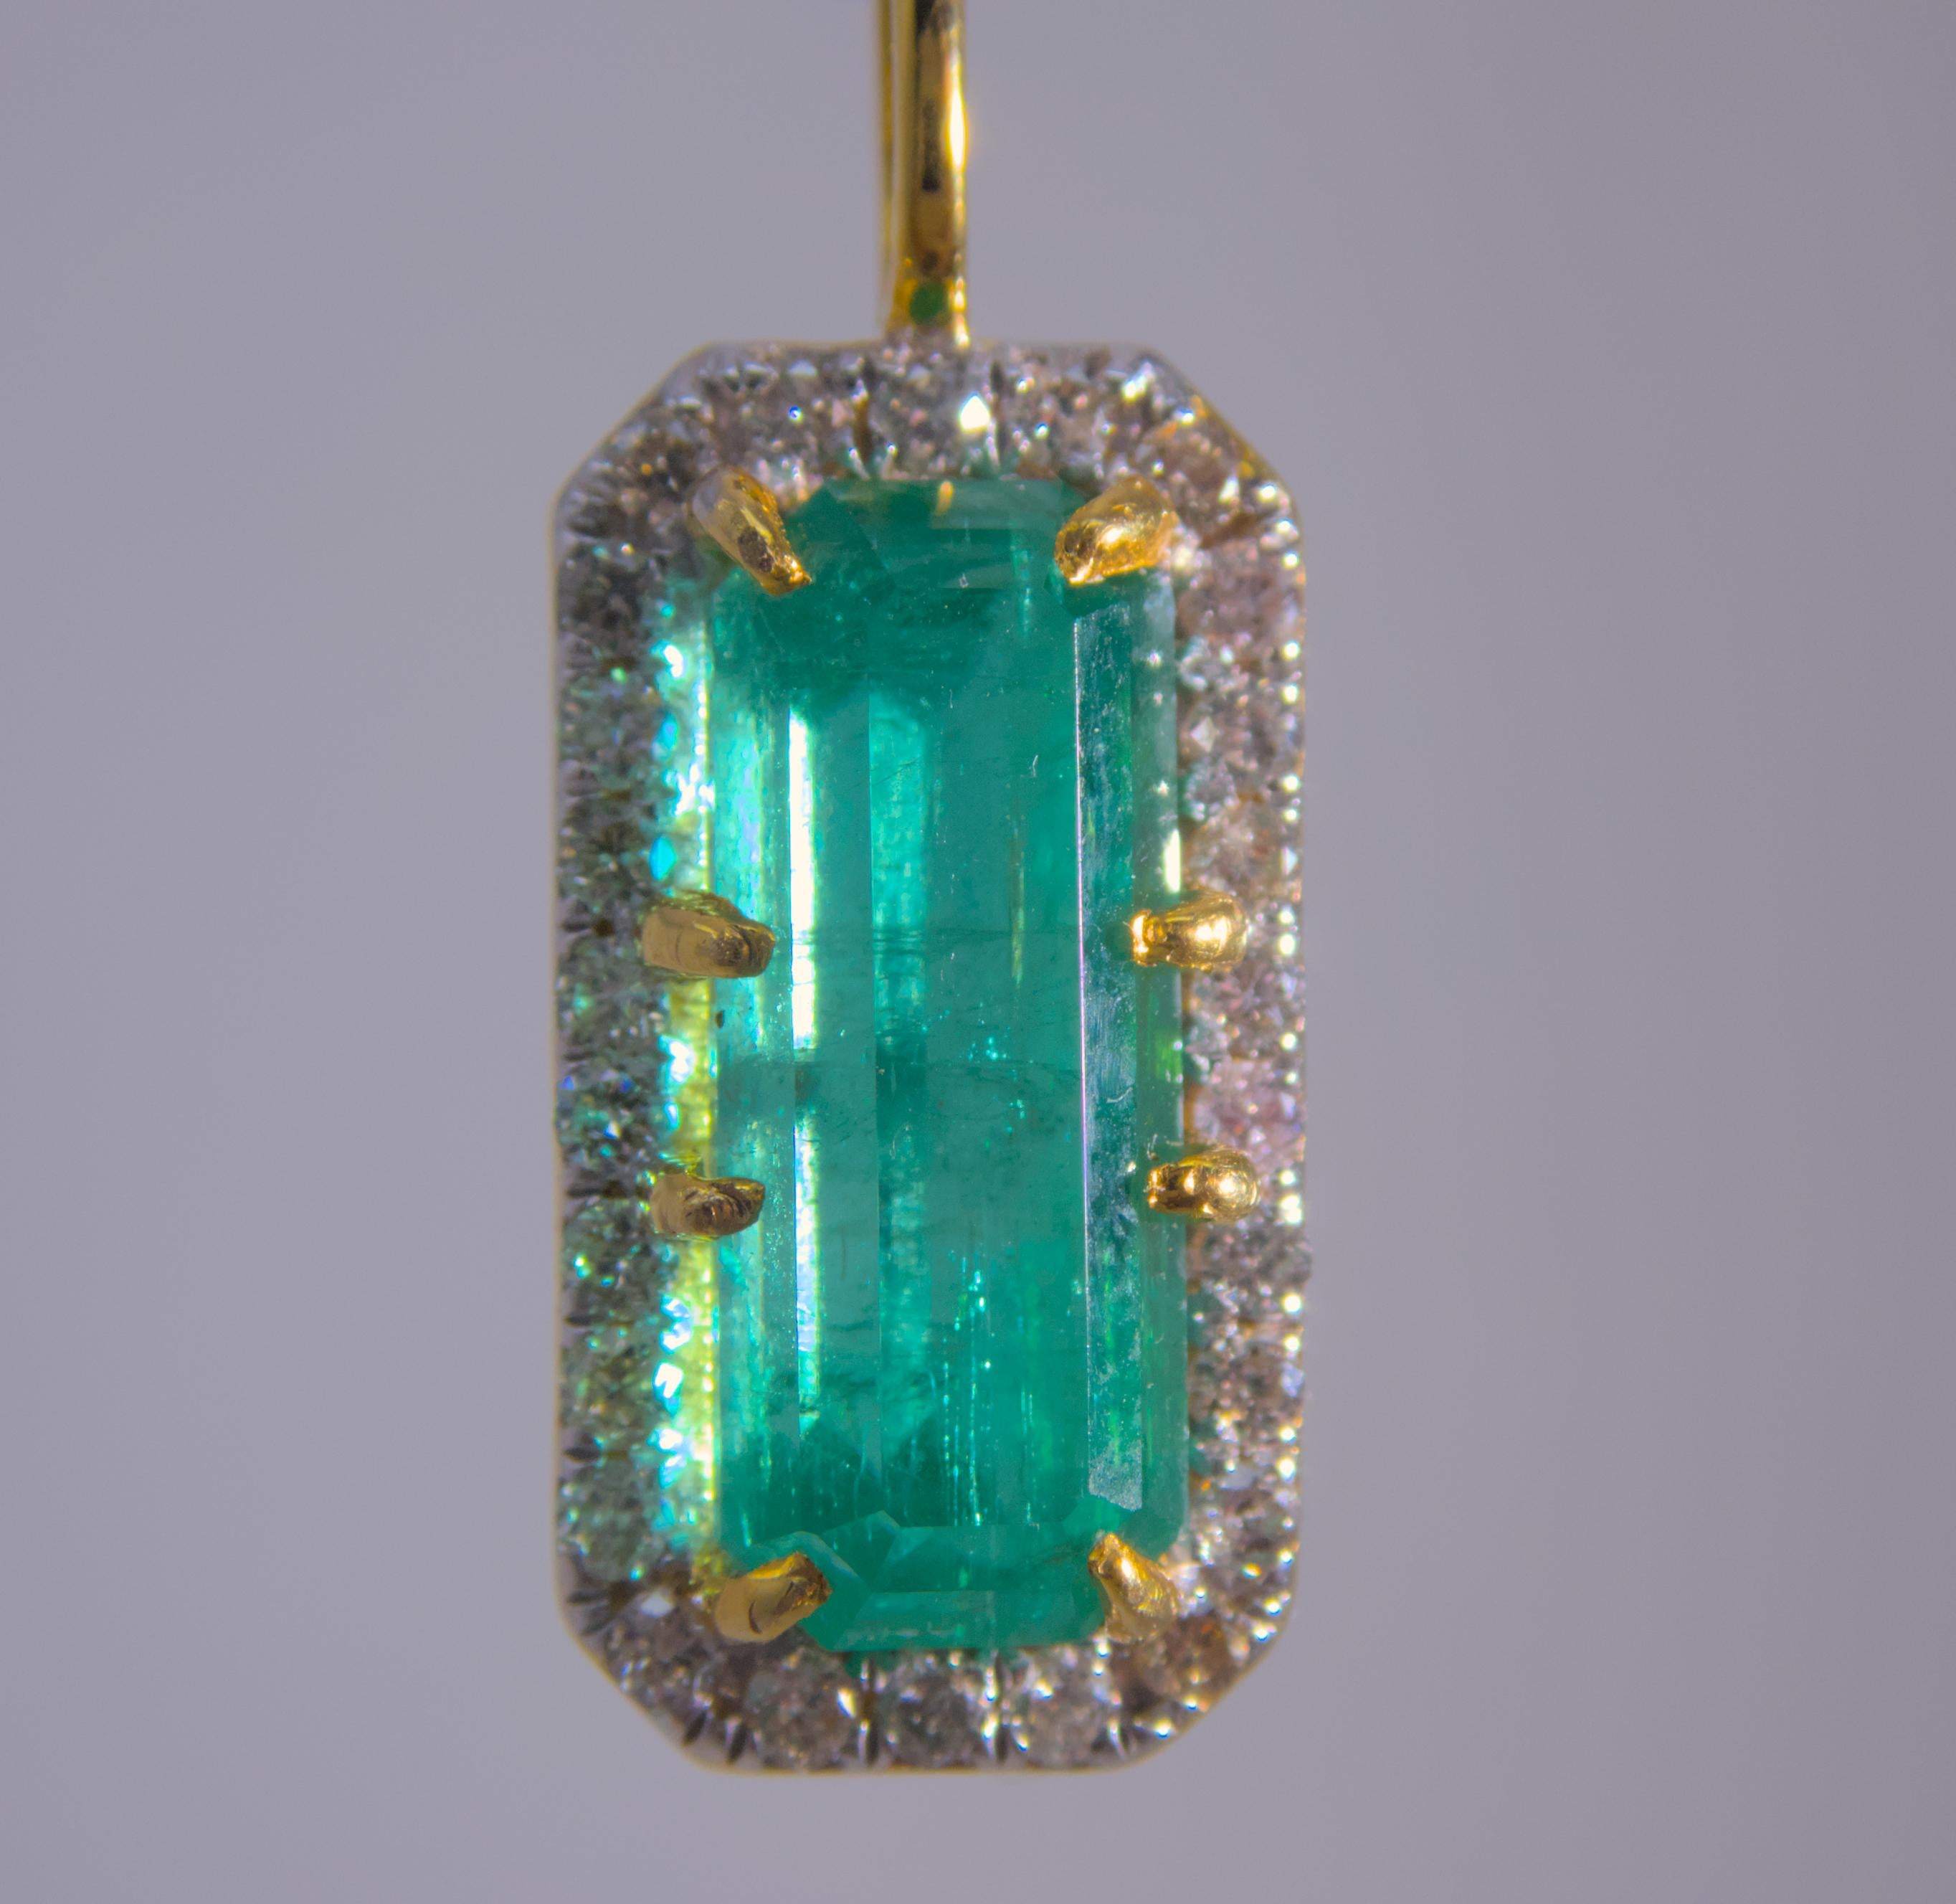 Baguette Cut Stunning 4.72 Afghan Emerald Pendant with Diamond Halo